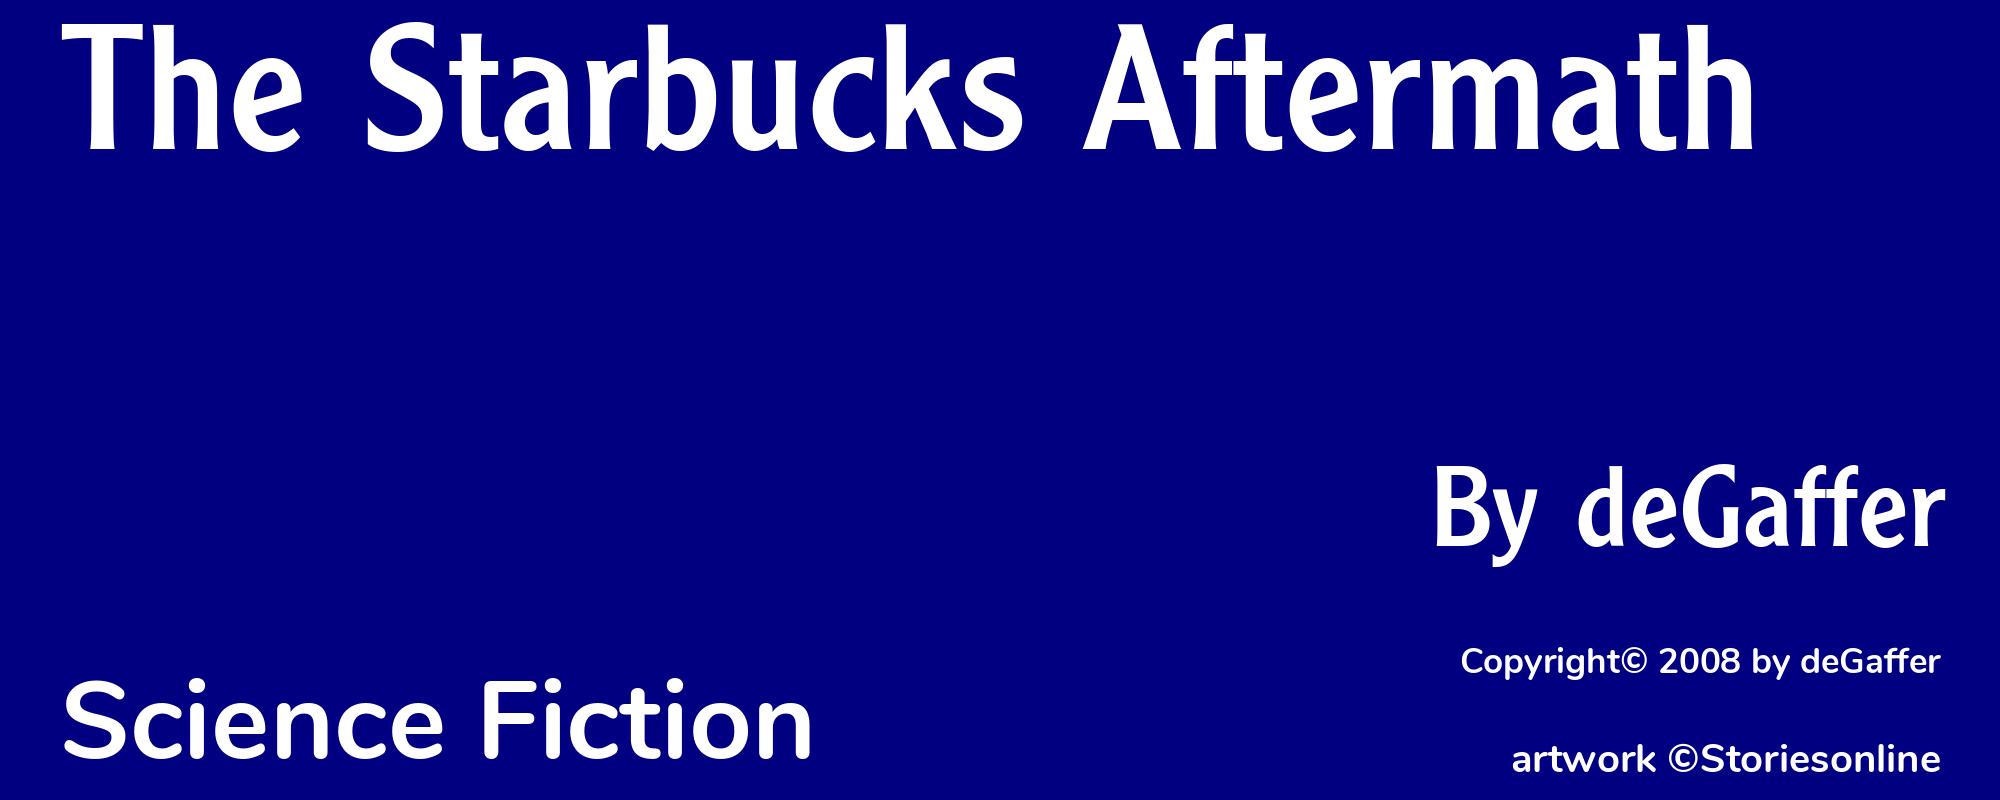 The Starbucks Aftermath - Cover